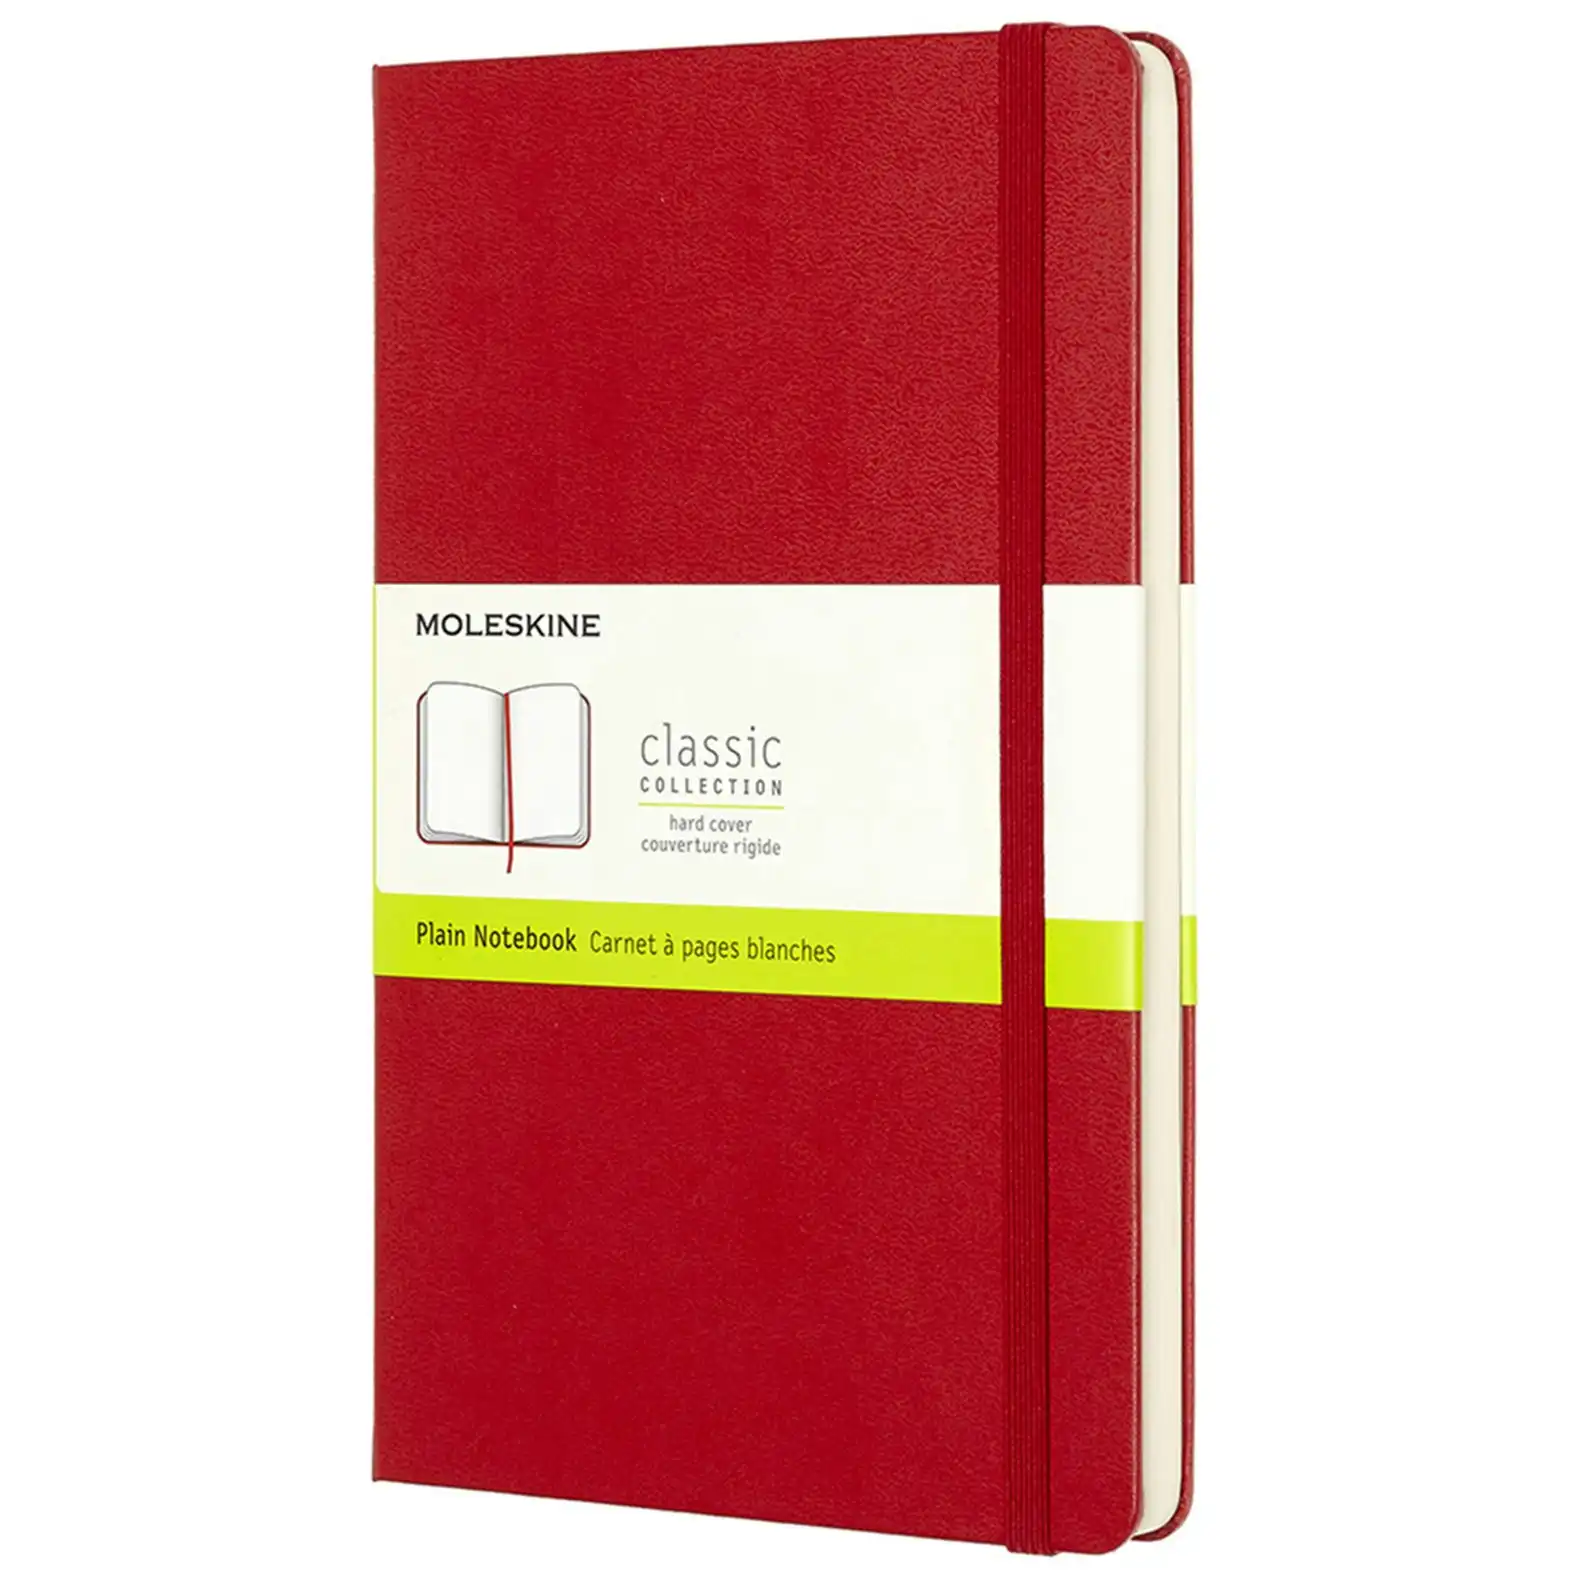 Moleskine Classic Hard Cover Notebook Plain Student Journal Pad L Scarlet Red